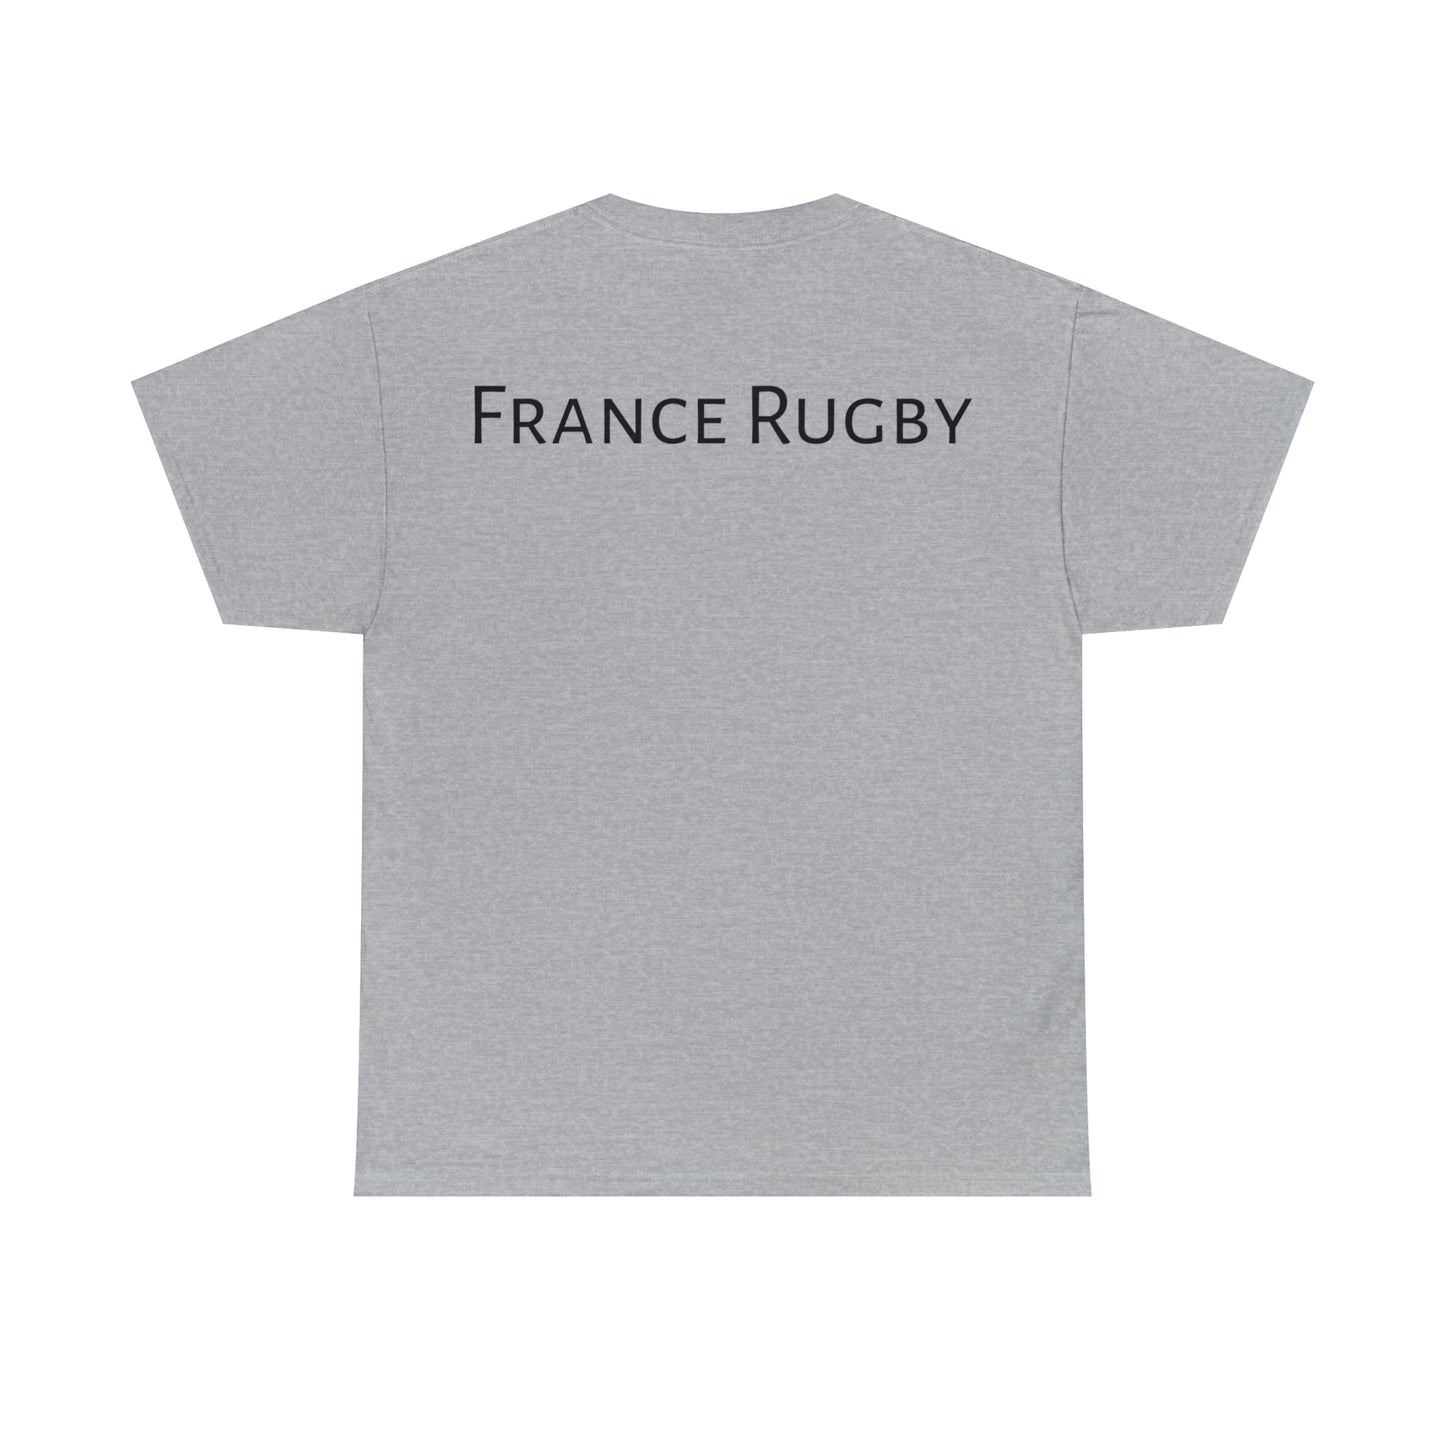 Napoleon Rugby - light shirts